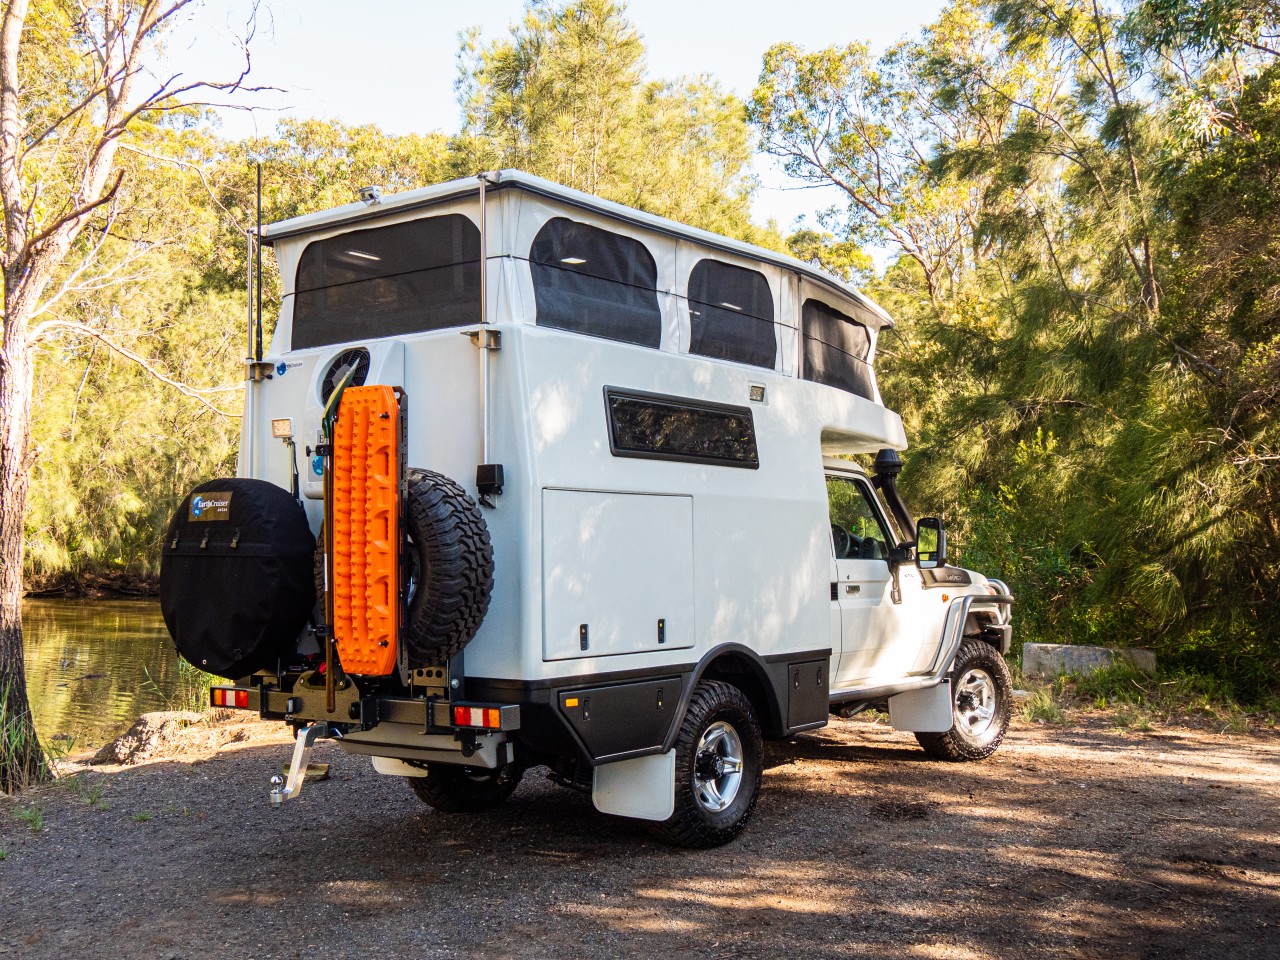 The EarthCruiser XTR250 combines an EarthCruiser motorhome module with an upgraded Land Cruiser 79 Series chassis